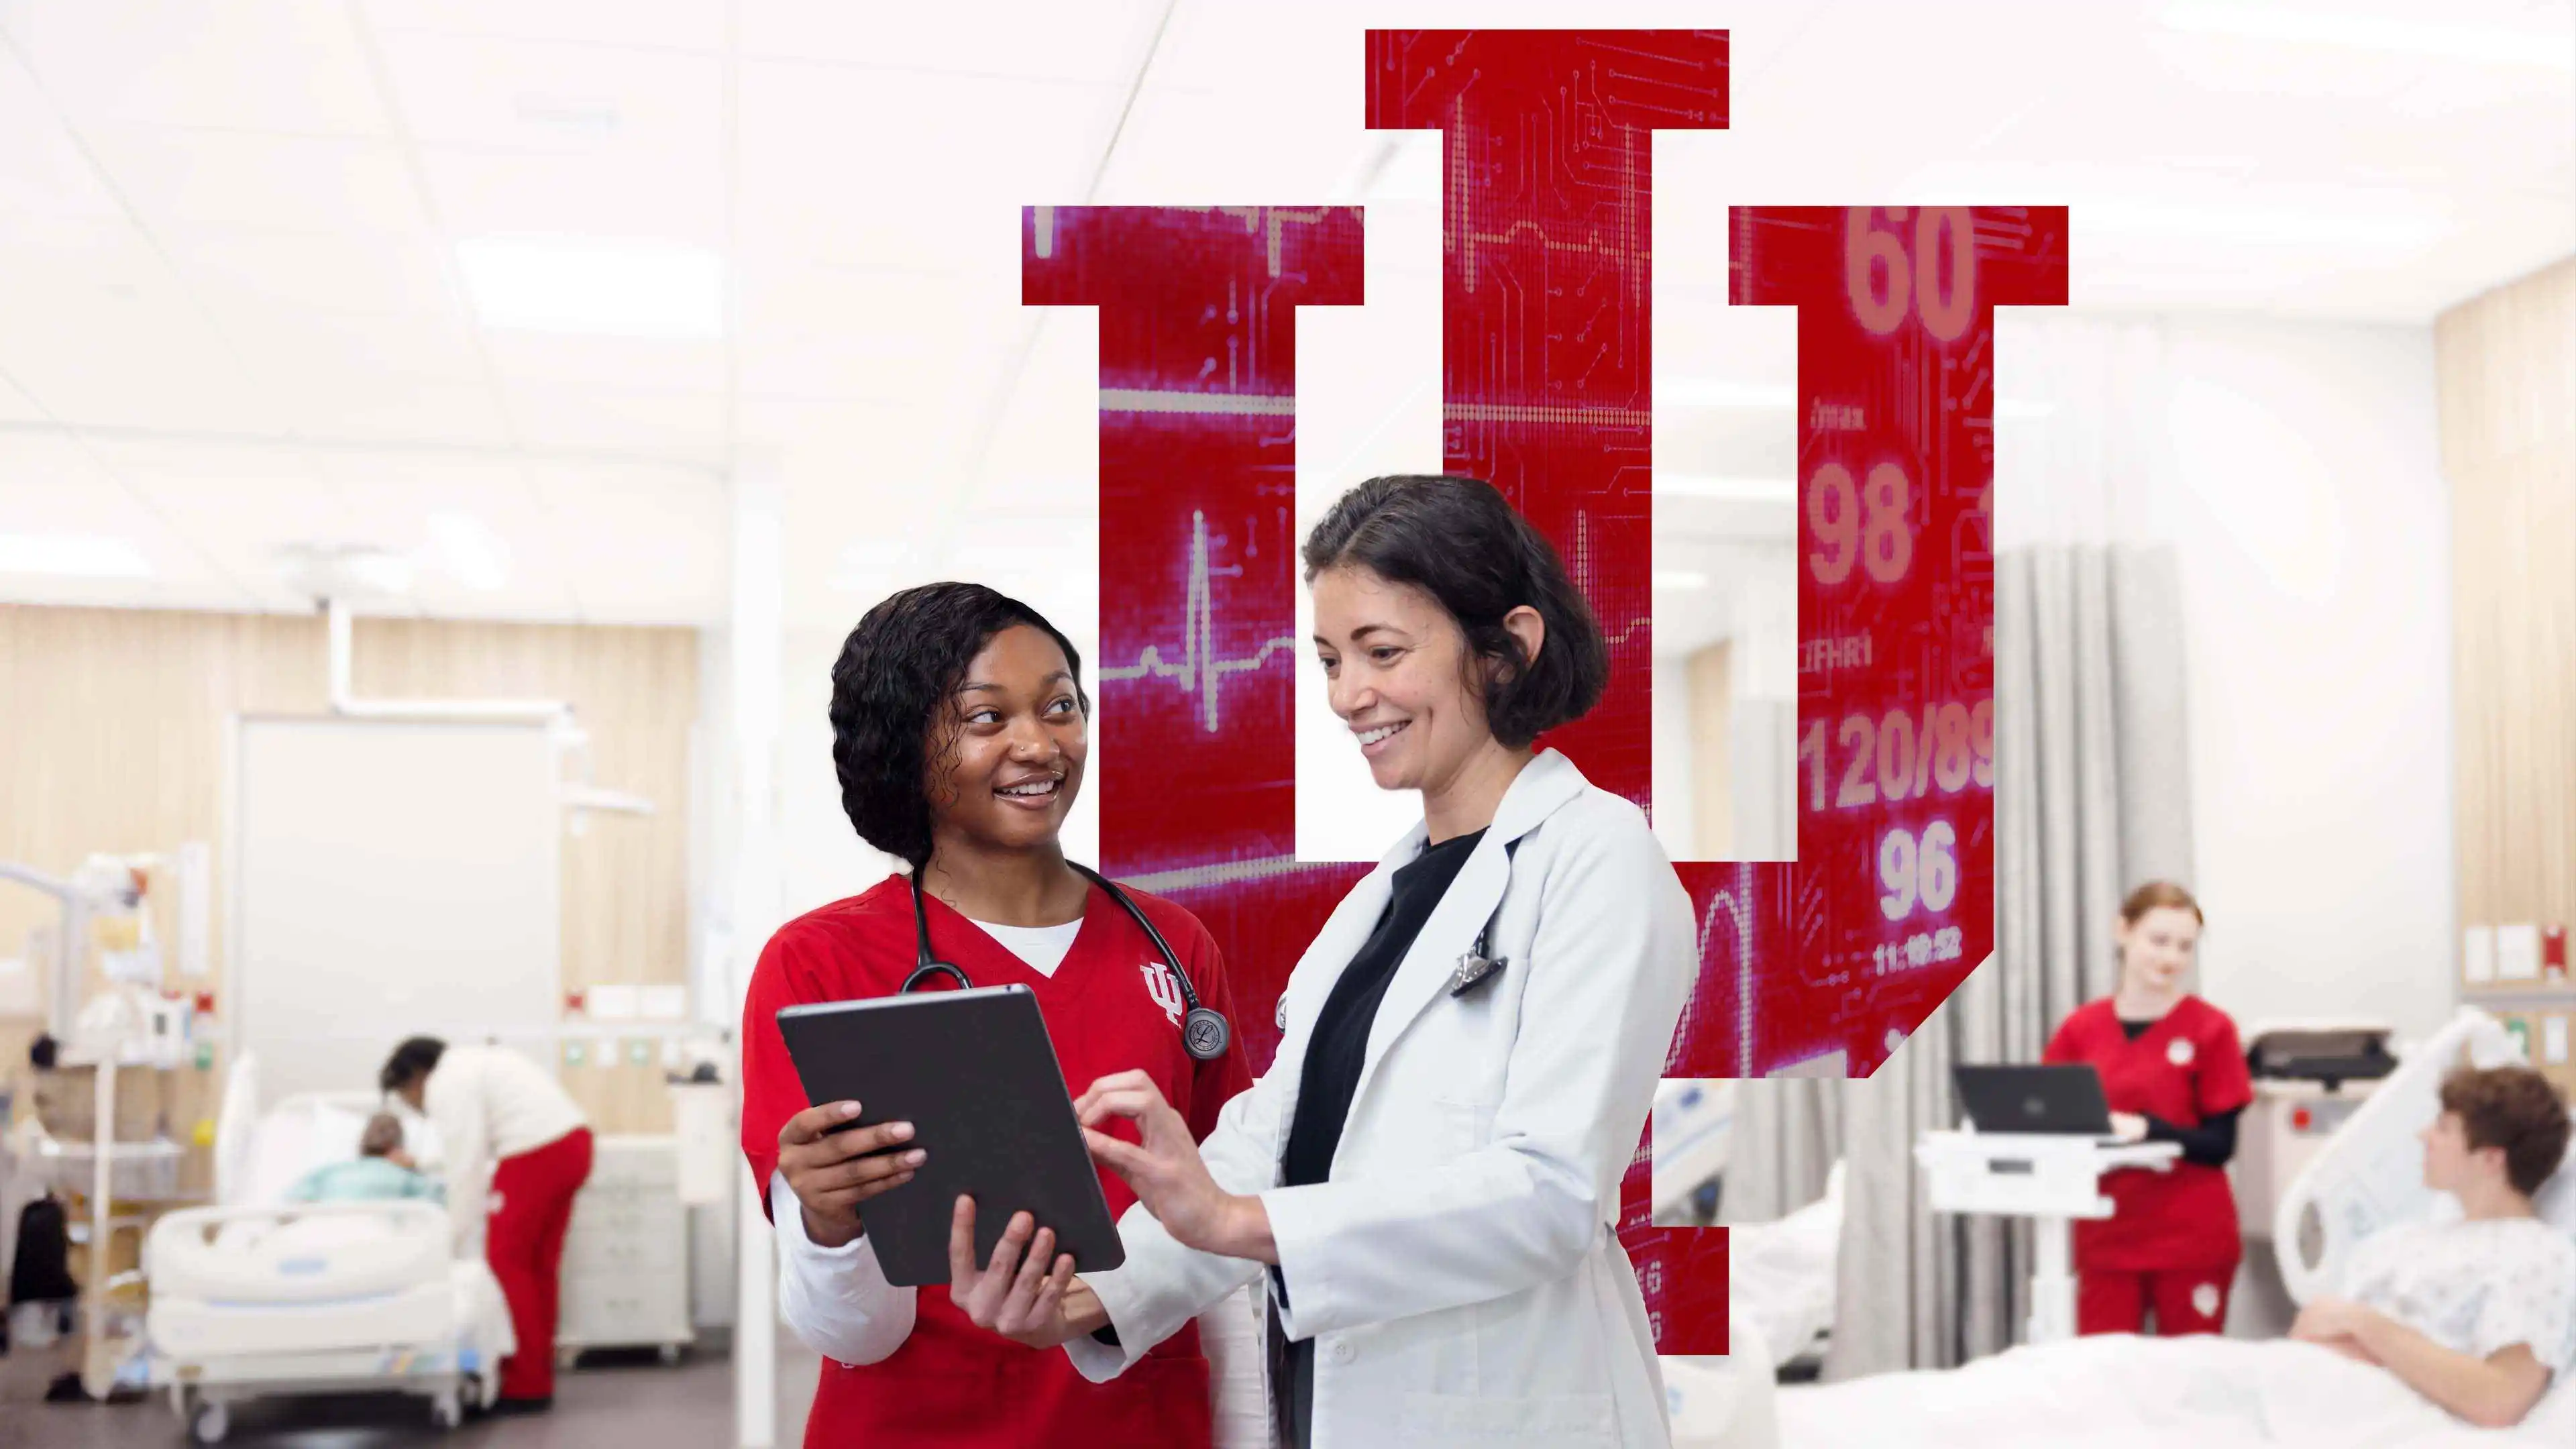 A doctor and nurse review a medical record, while a patient receives medical care from a nurse in the background. The IU trident is overlaid with vital signs.